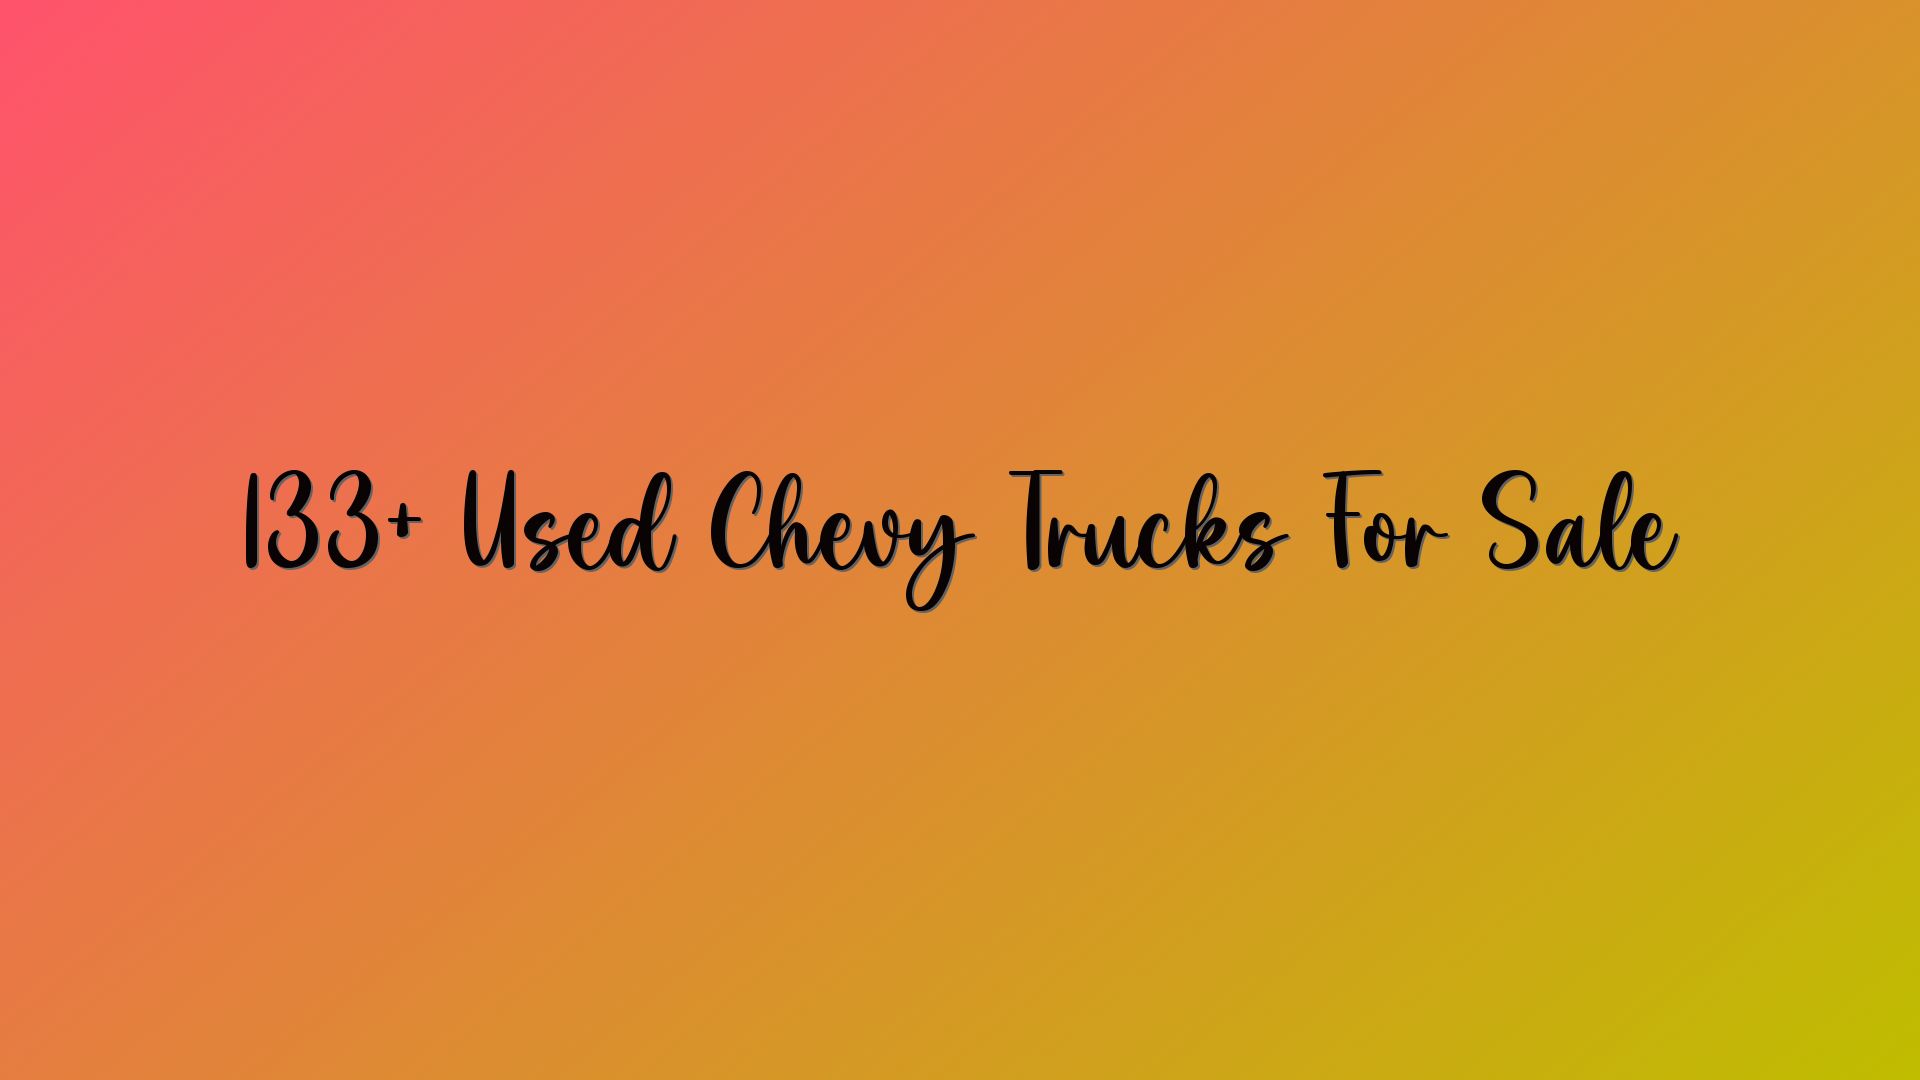 133+ Used Chevy Trucks For Sale